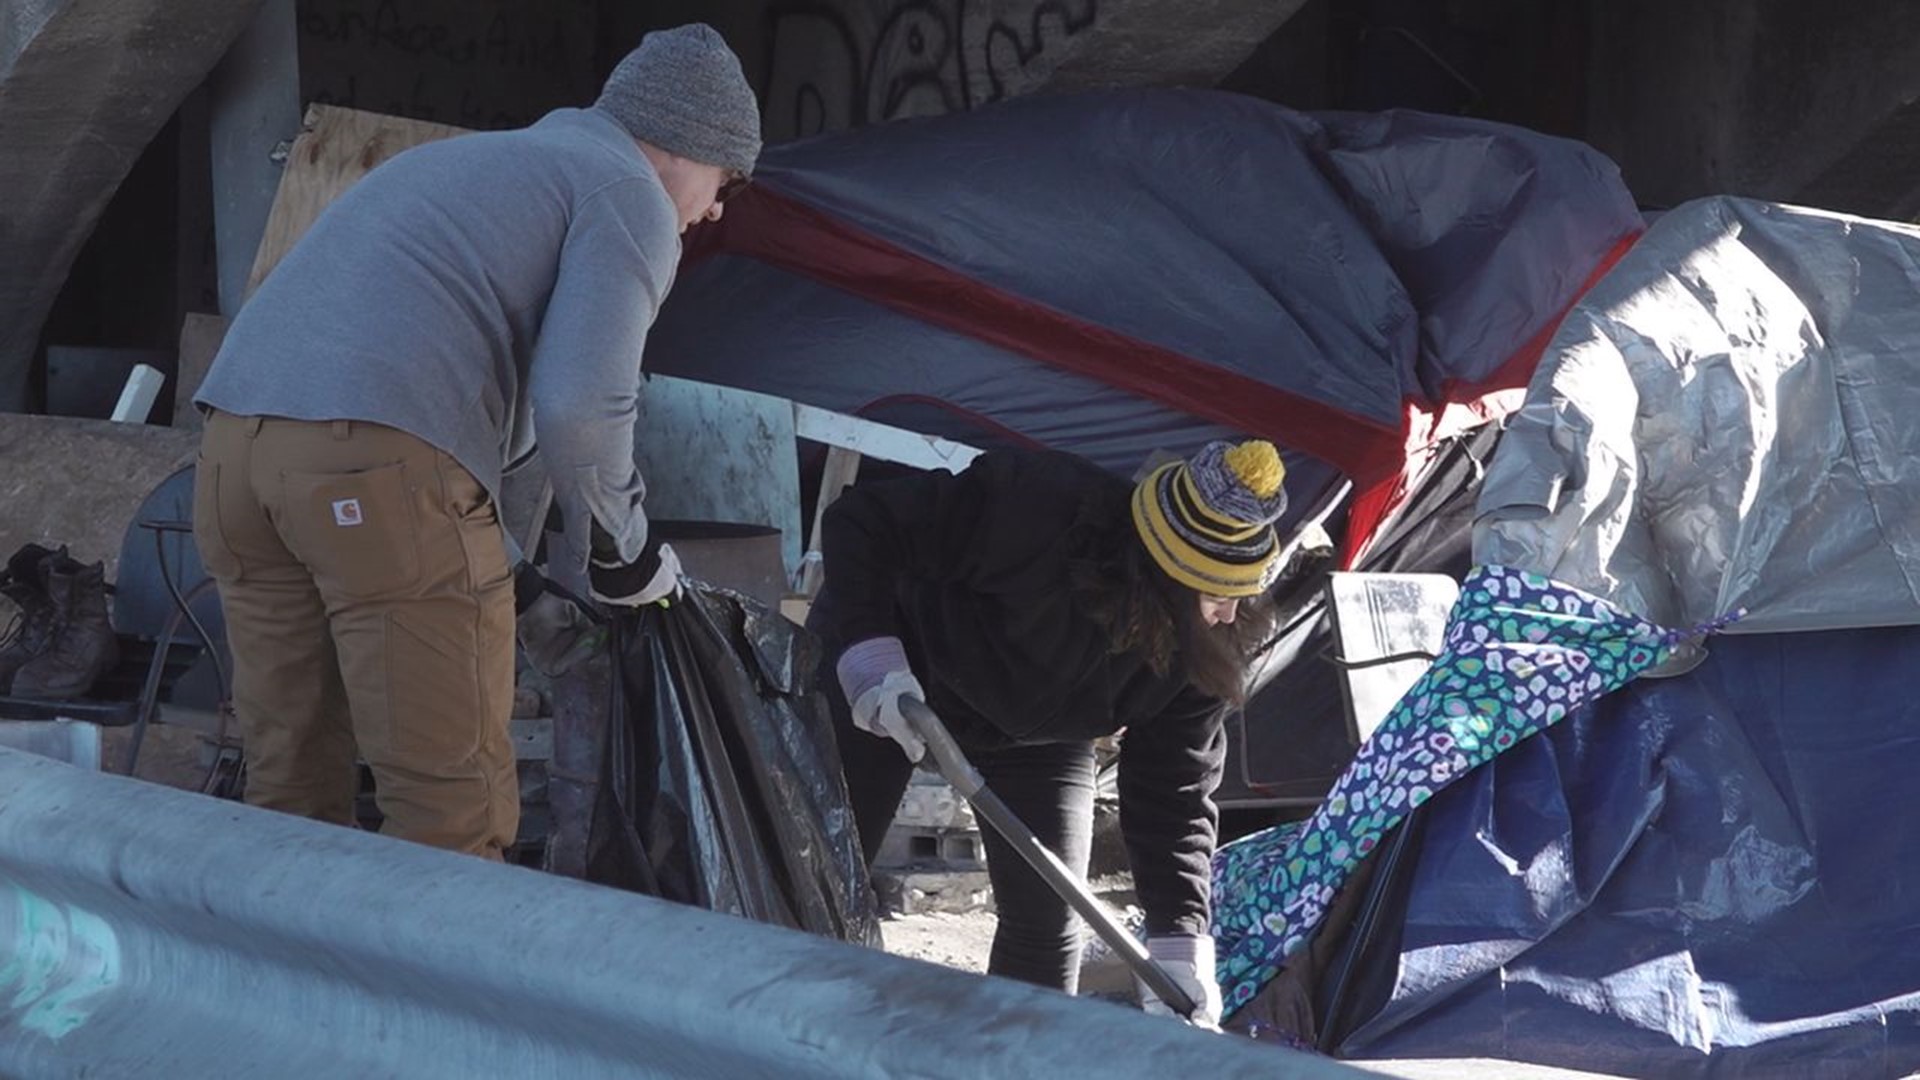 After a weekend of cleanup and removal of homeless encampments under the Mulberry Street Bridge, city officials will meet for a press conference.